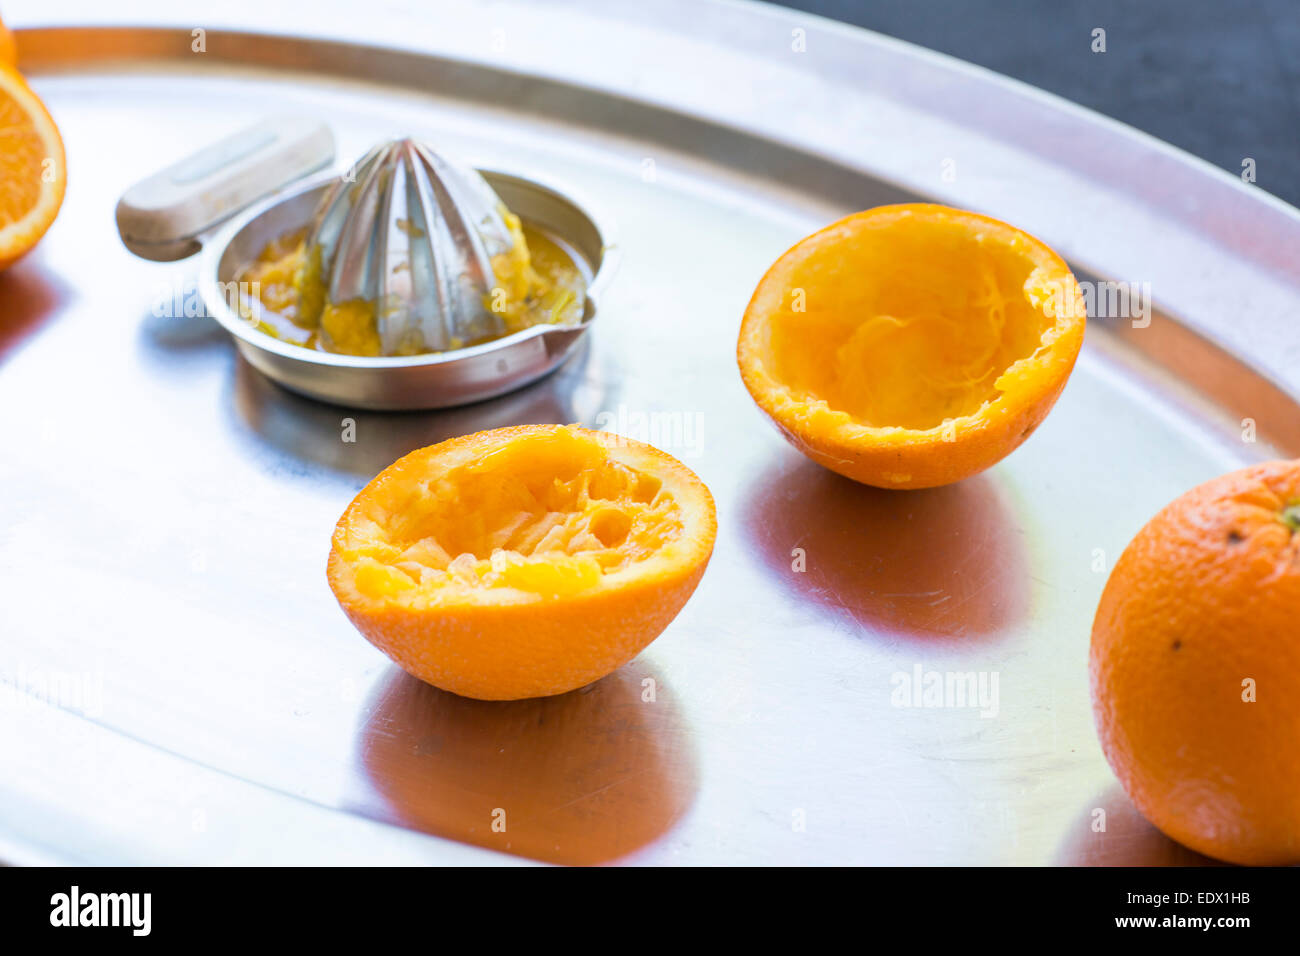 freshly squeezed oranges on a silver tray with silver metal hand juicer. Stock Photo